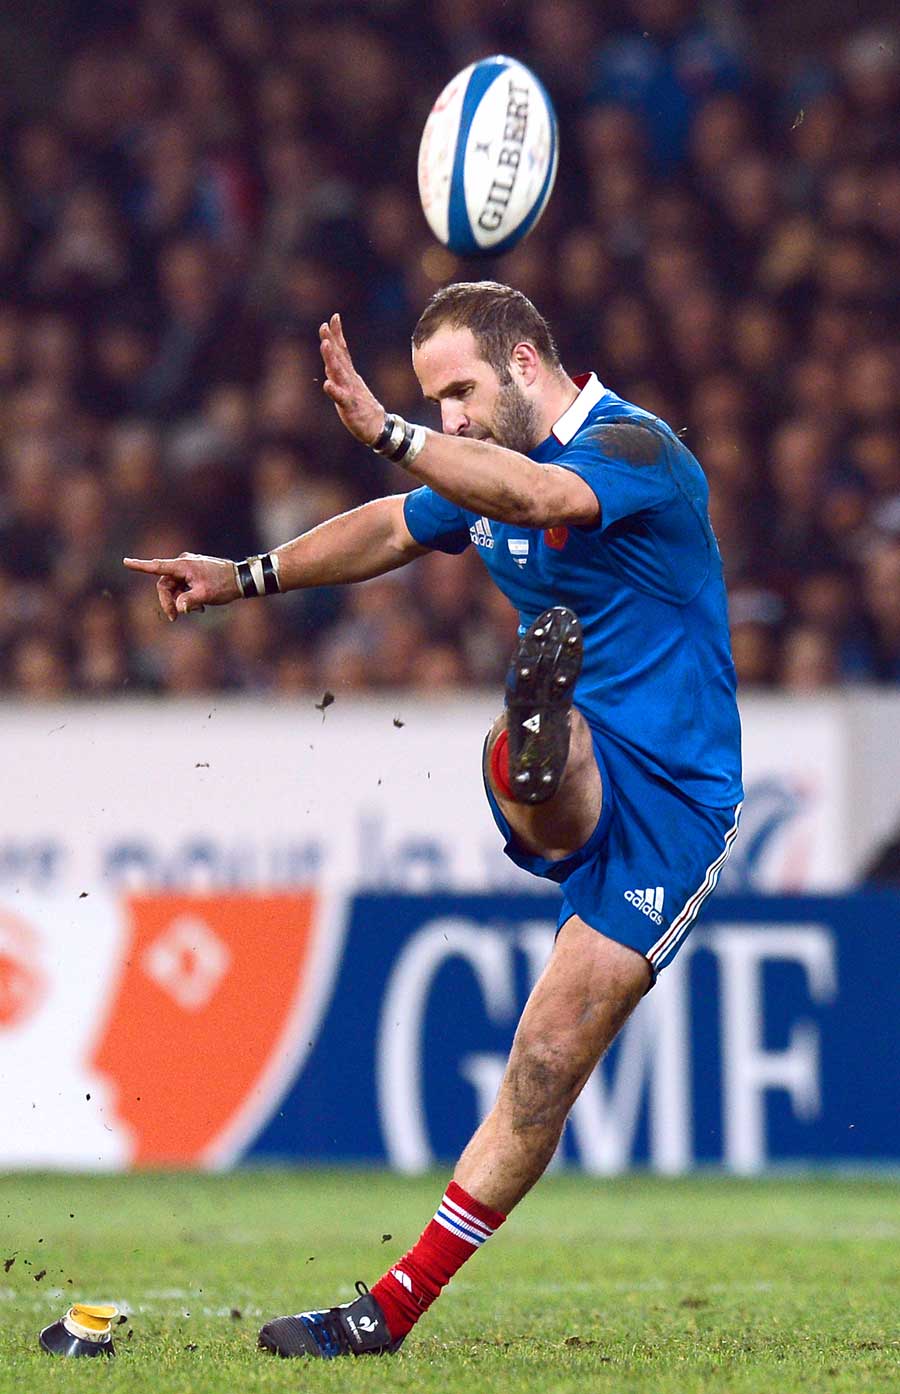 France's Frederic Michalak slots a penalty